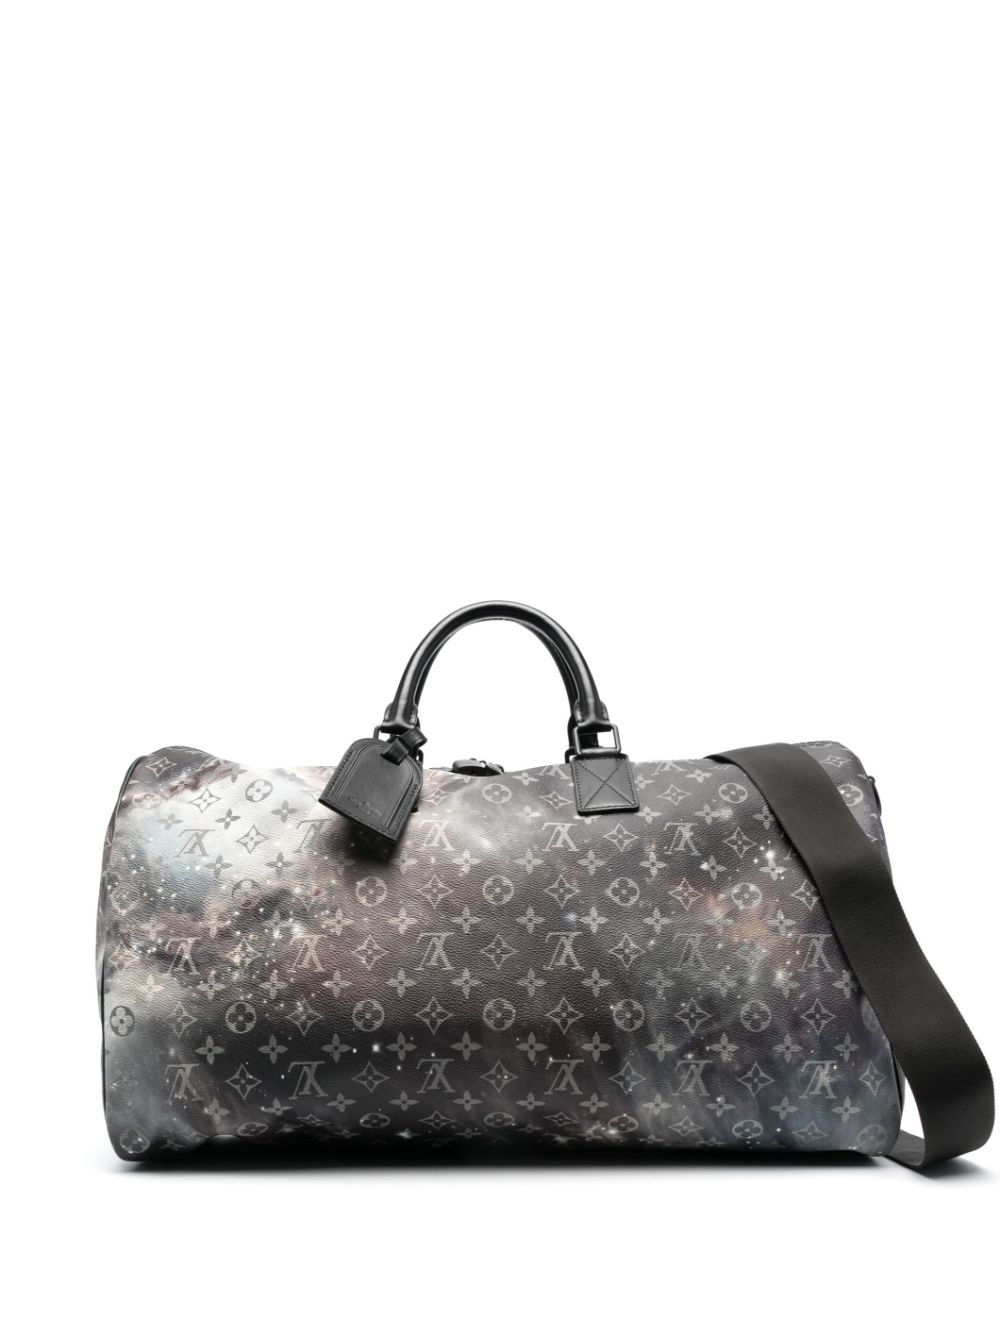 Louis Vuitton Pre-Owned Keepall 50 Galaxy Reisetasche - Schwarz von Louis Vuitton Pre-Owned